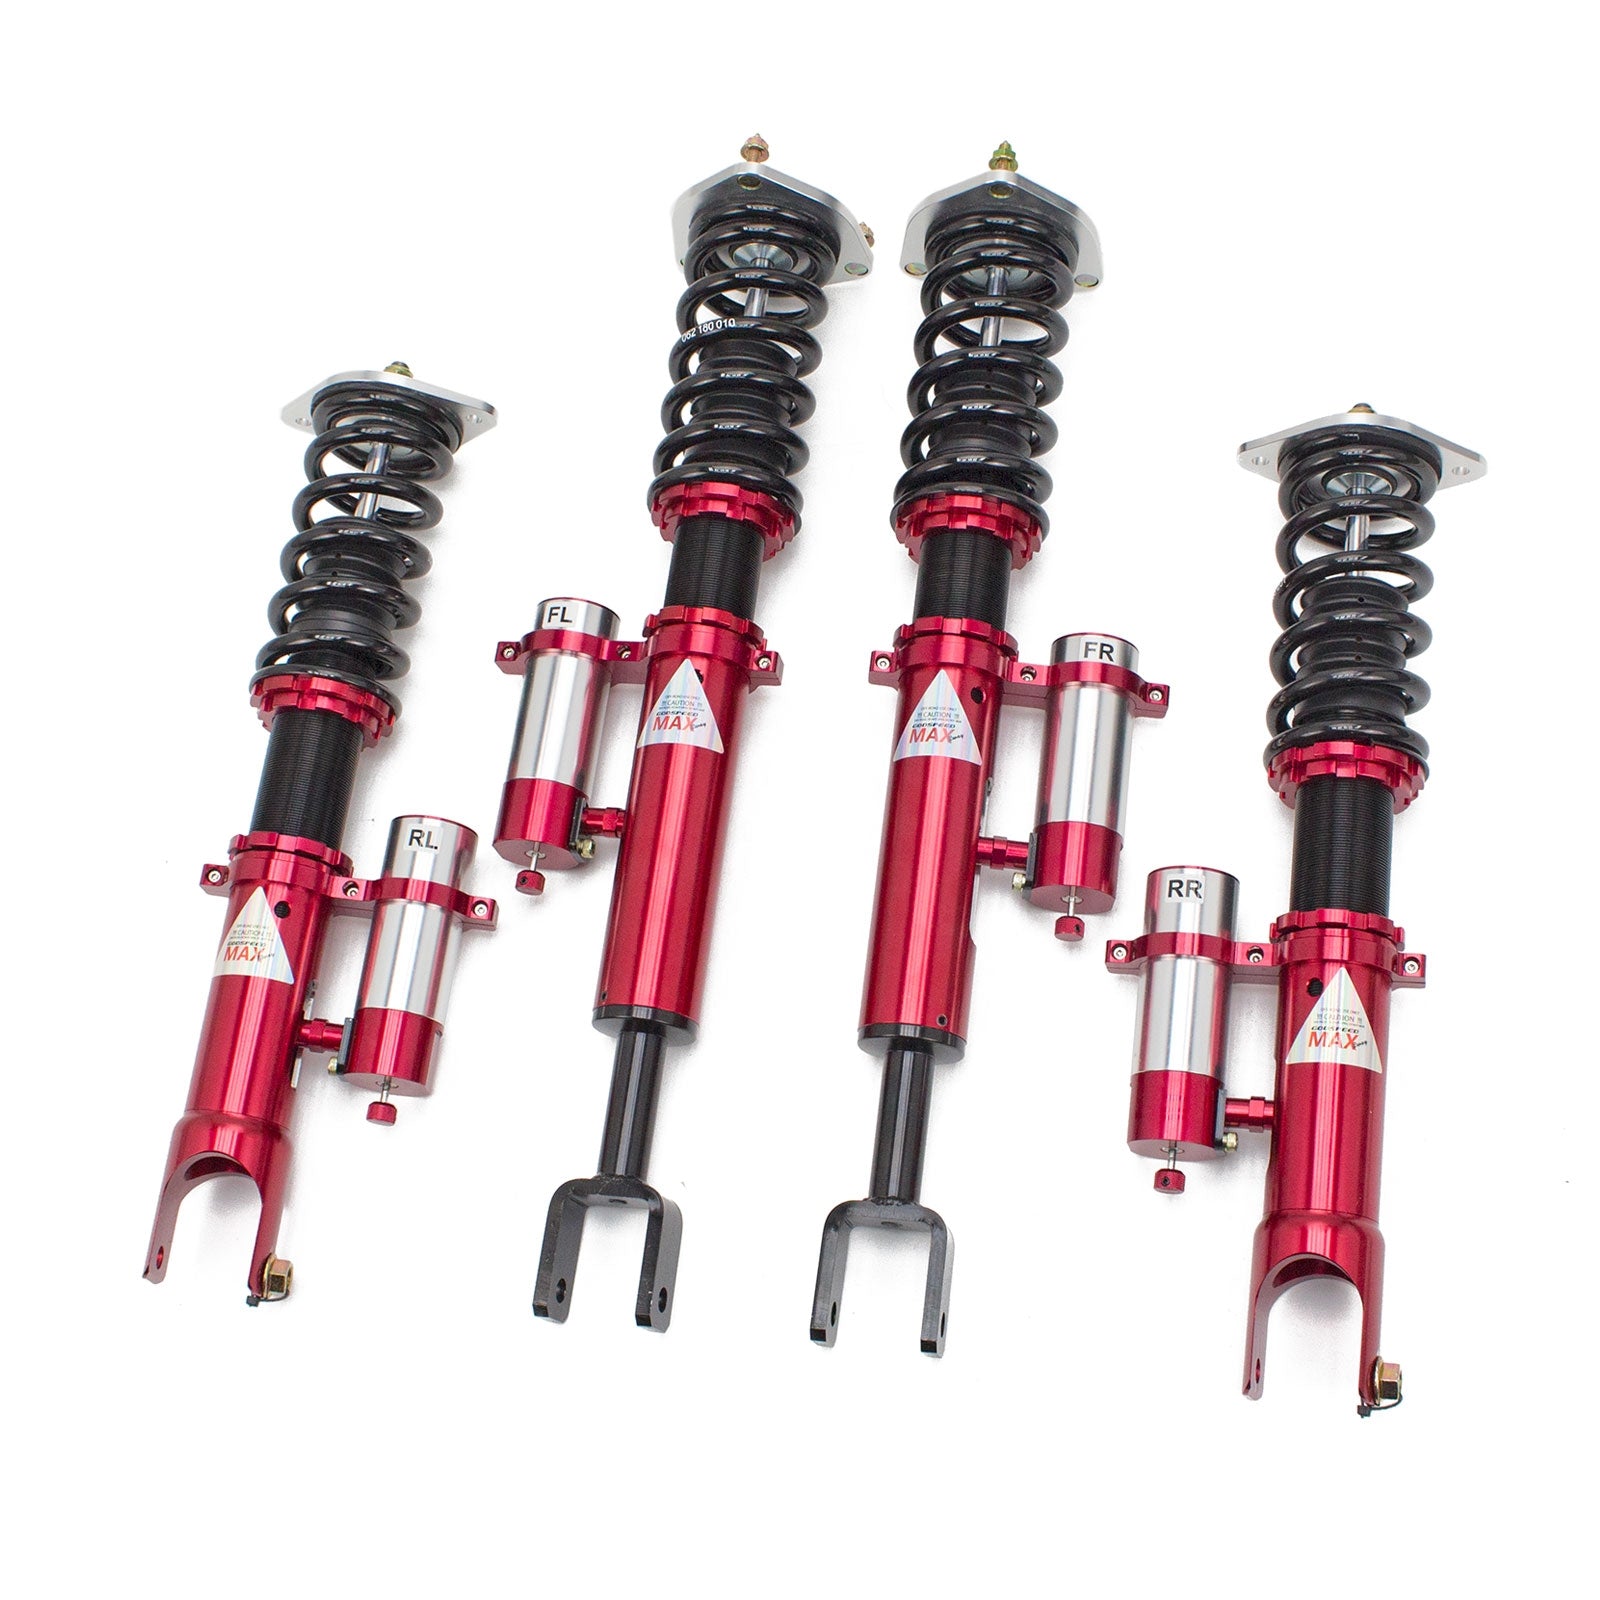 Godspeed Infiniti G35 Coupe (V35) 2003-07 MAXX 2-Way Coilover Dampers